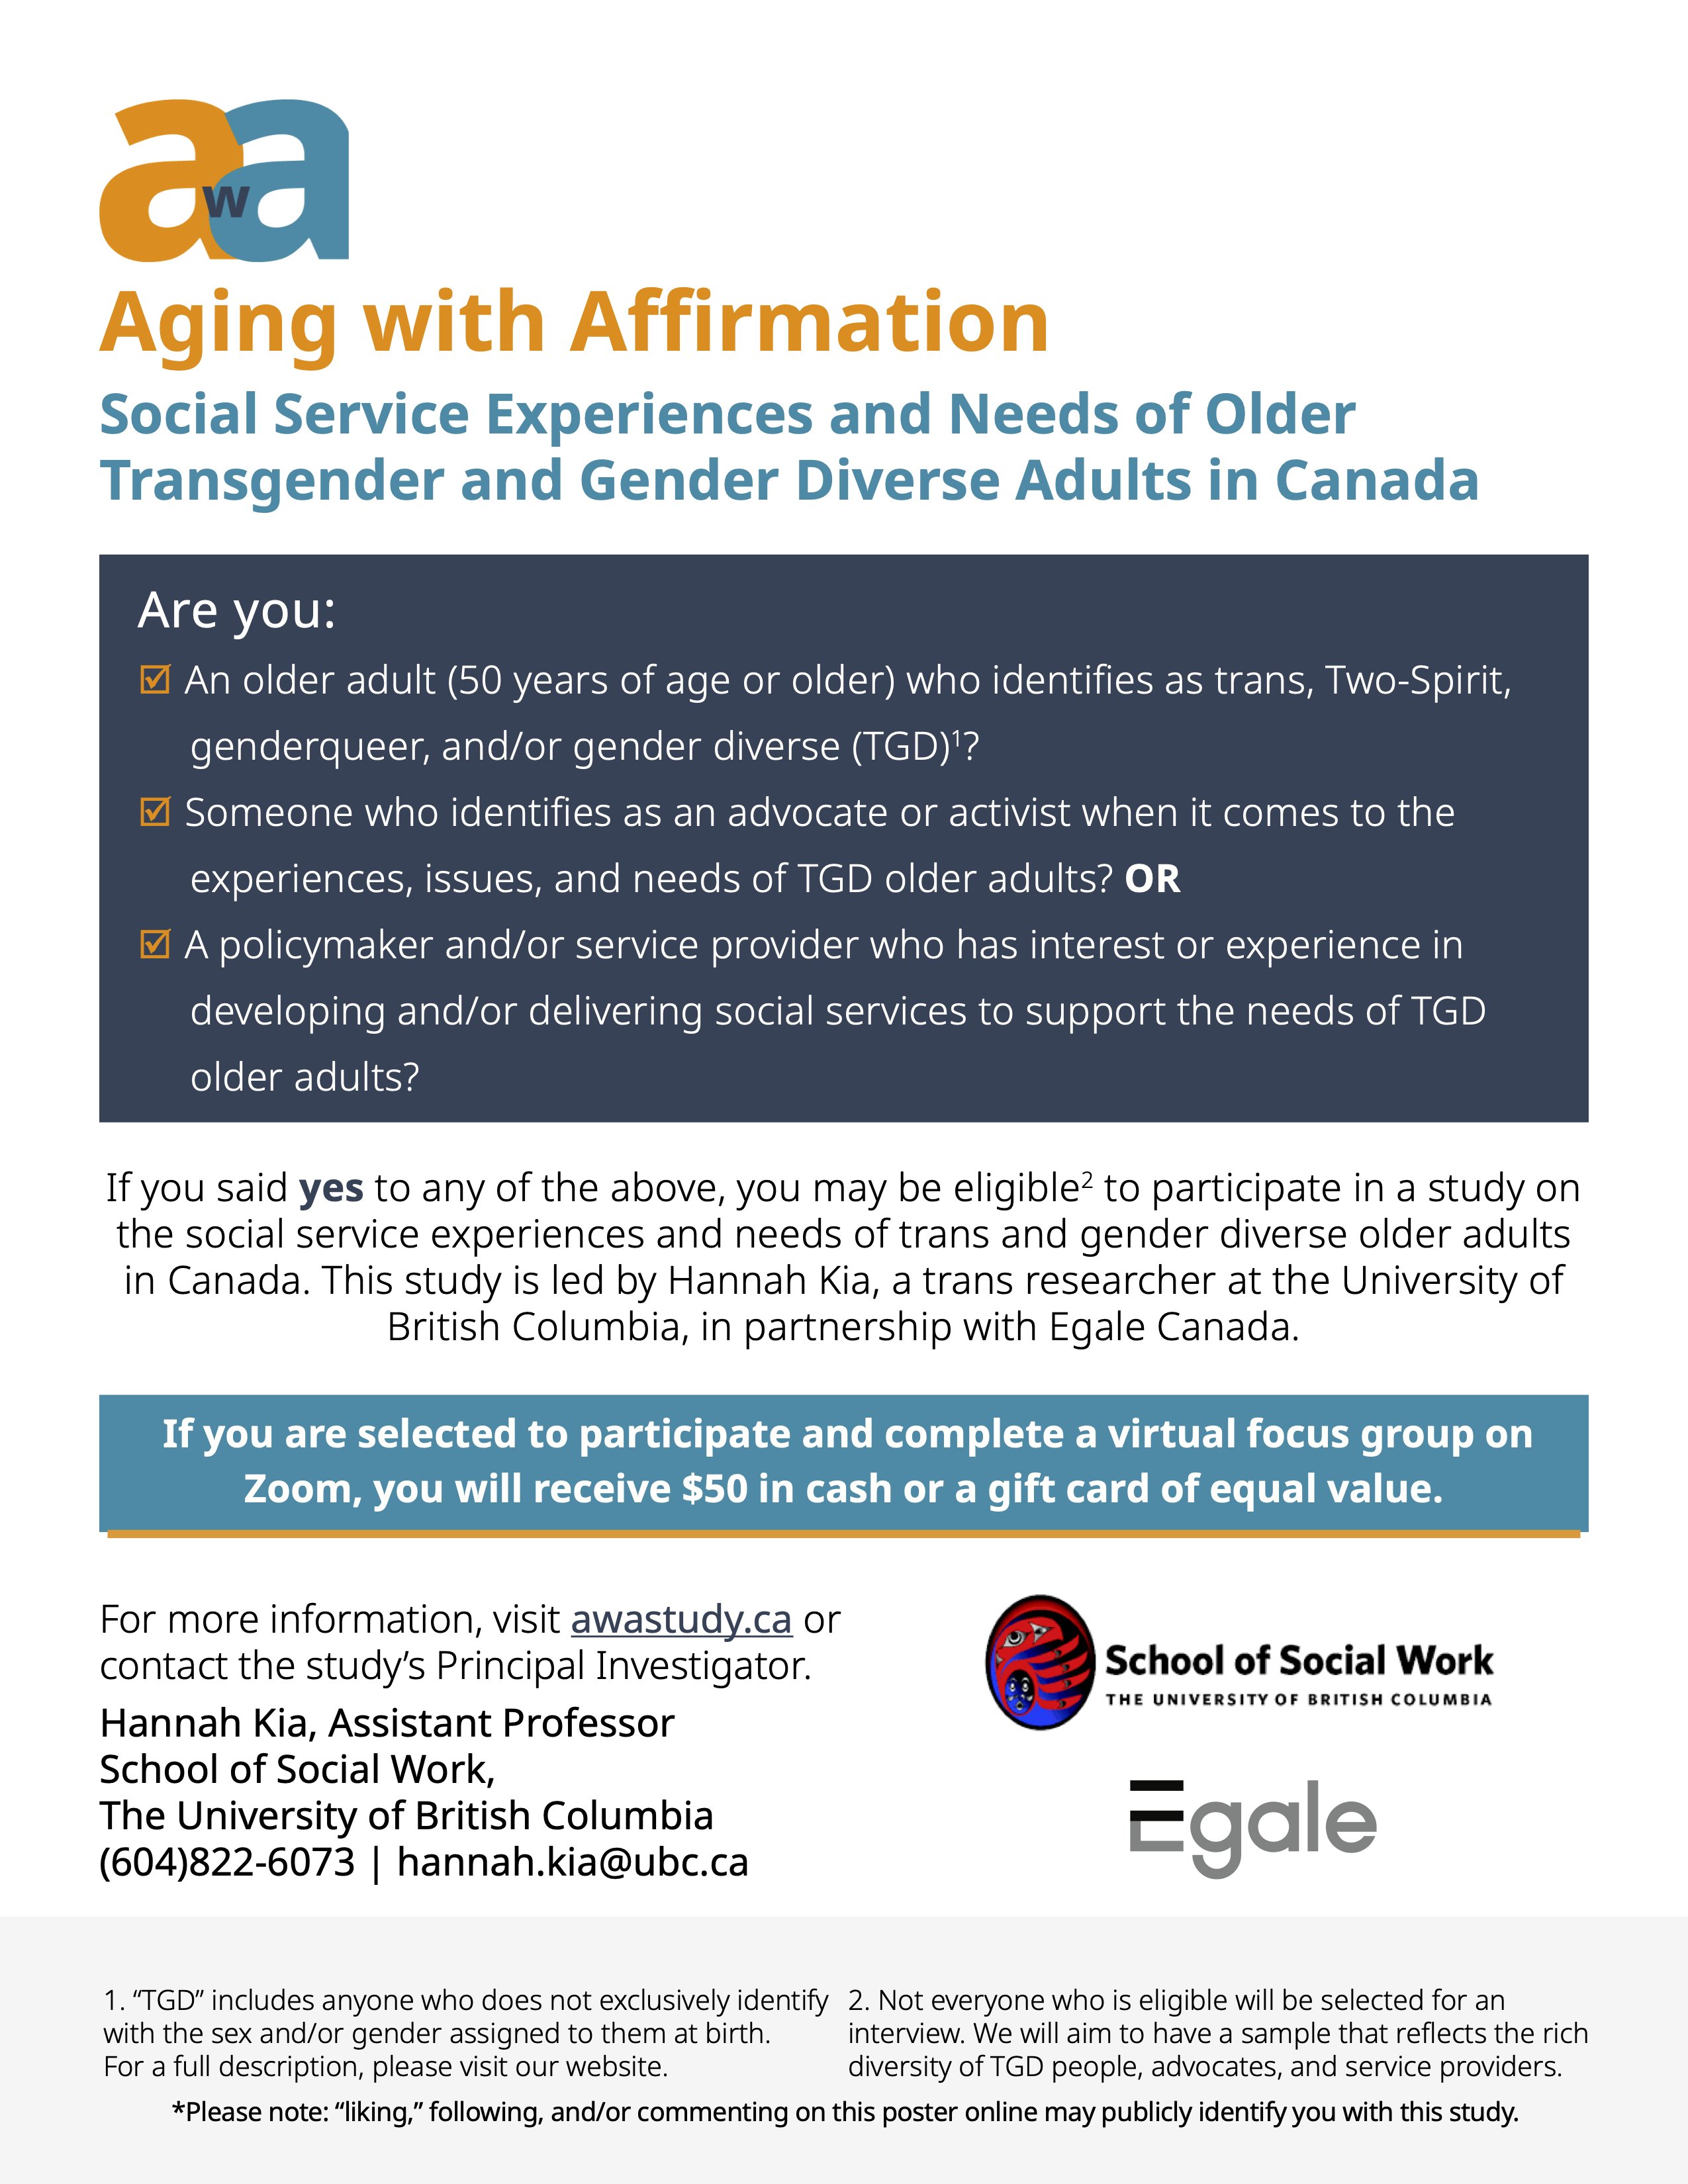 CBRC on X: New research study! Aging with Affirmation, in